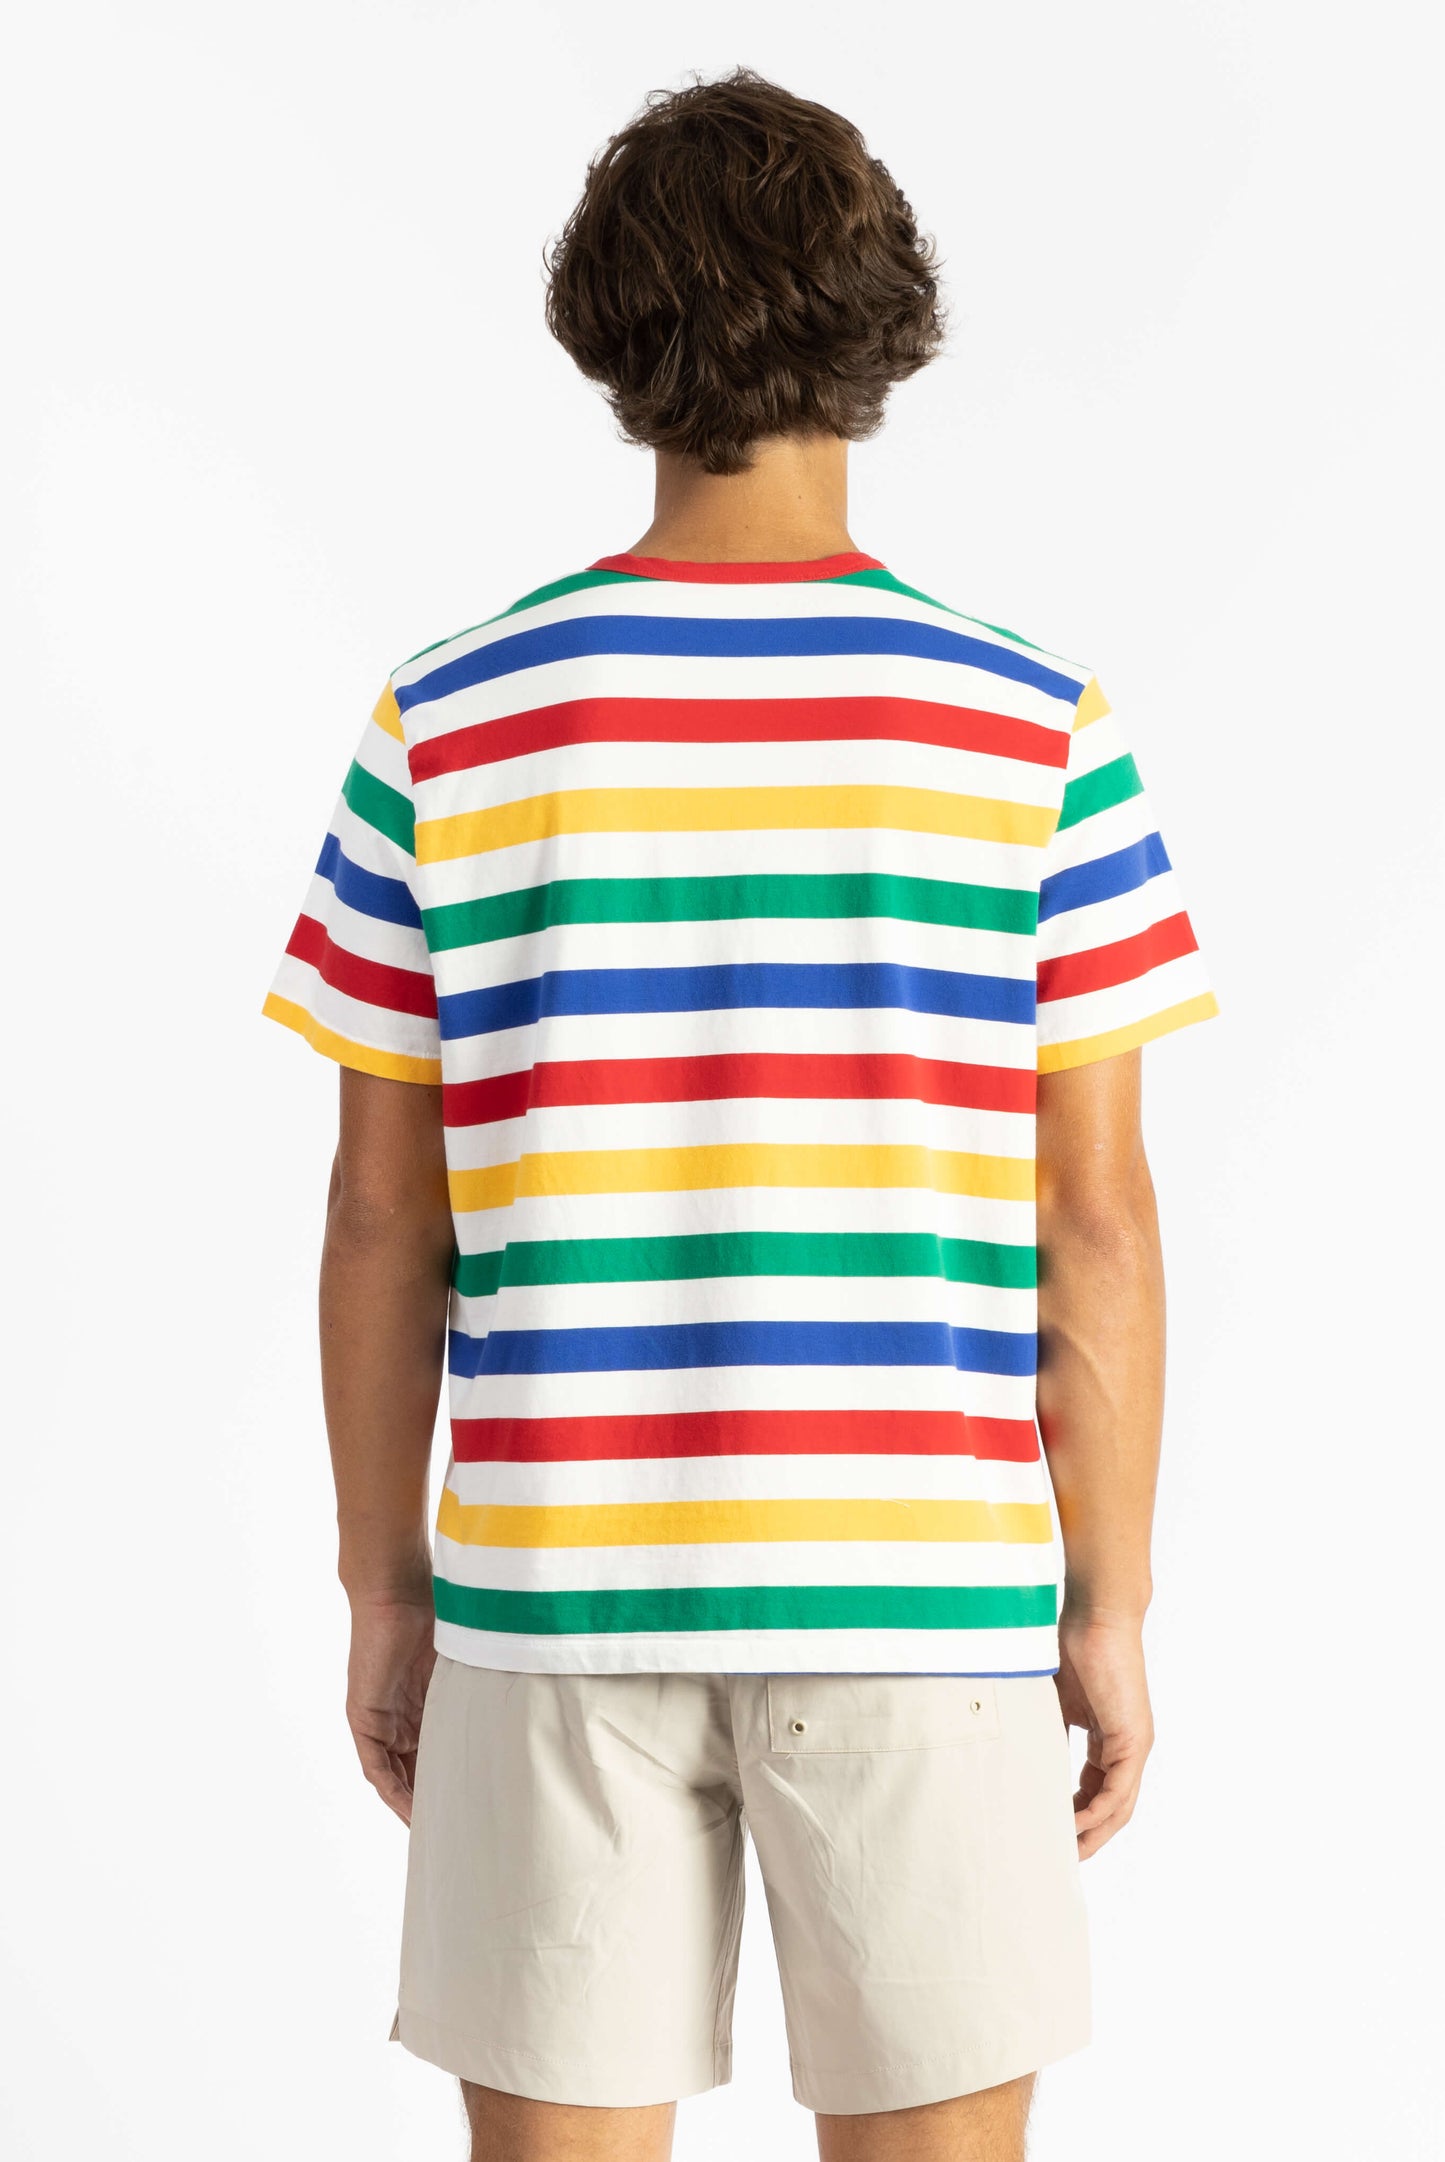 a man wearing a multi color tee shirt with big stripes and yellow shorts